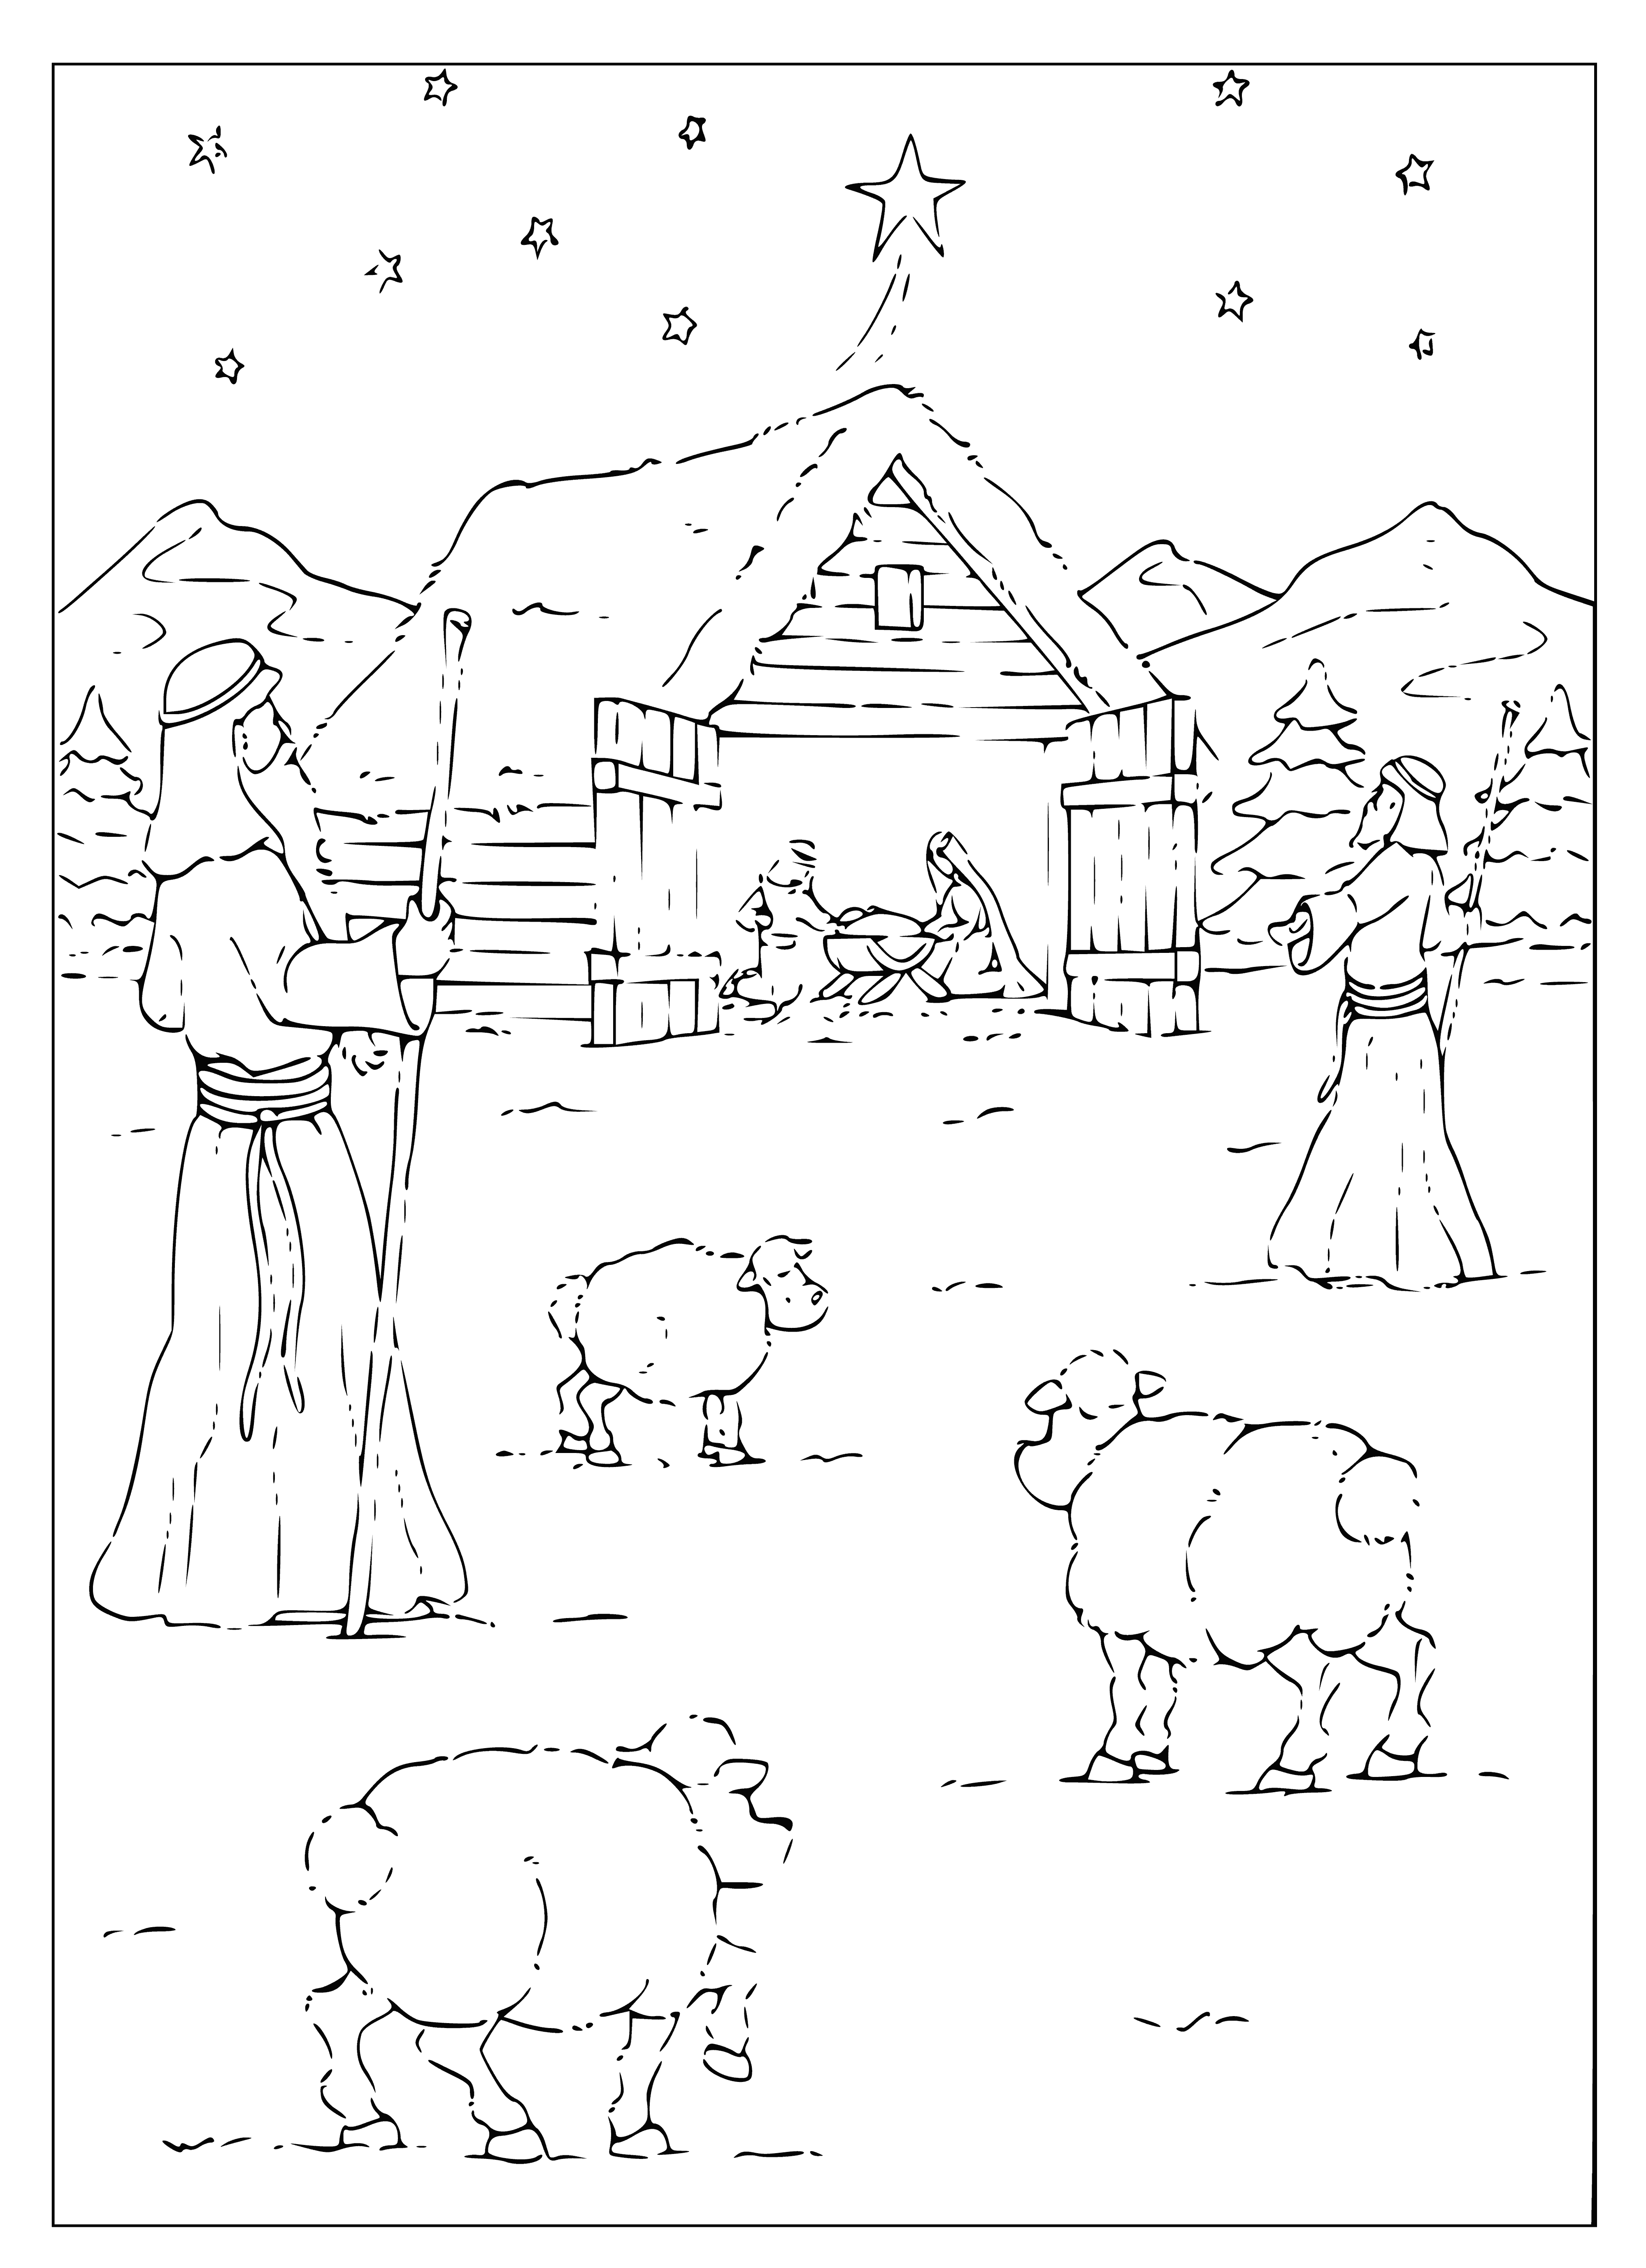 coloring page: A nativity scene of Jesus, Mary, Joseph, shepherds & sheep with stars shining in a dark sky.